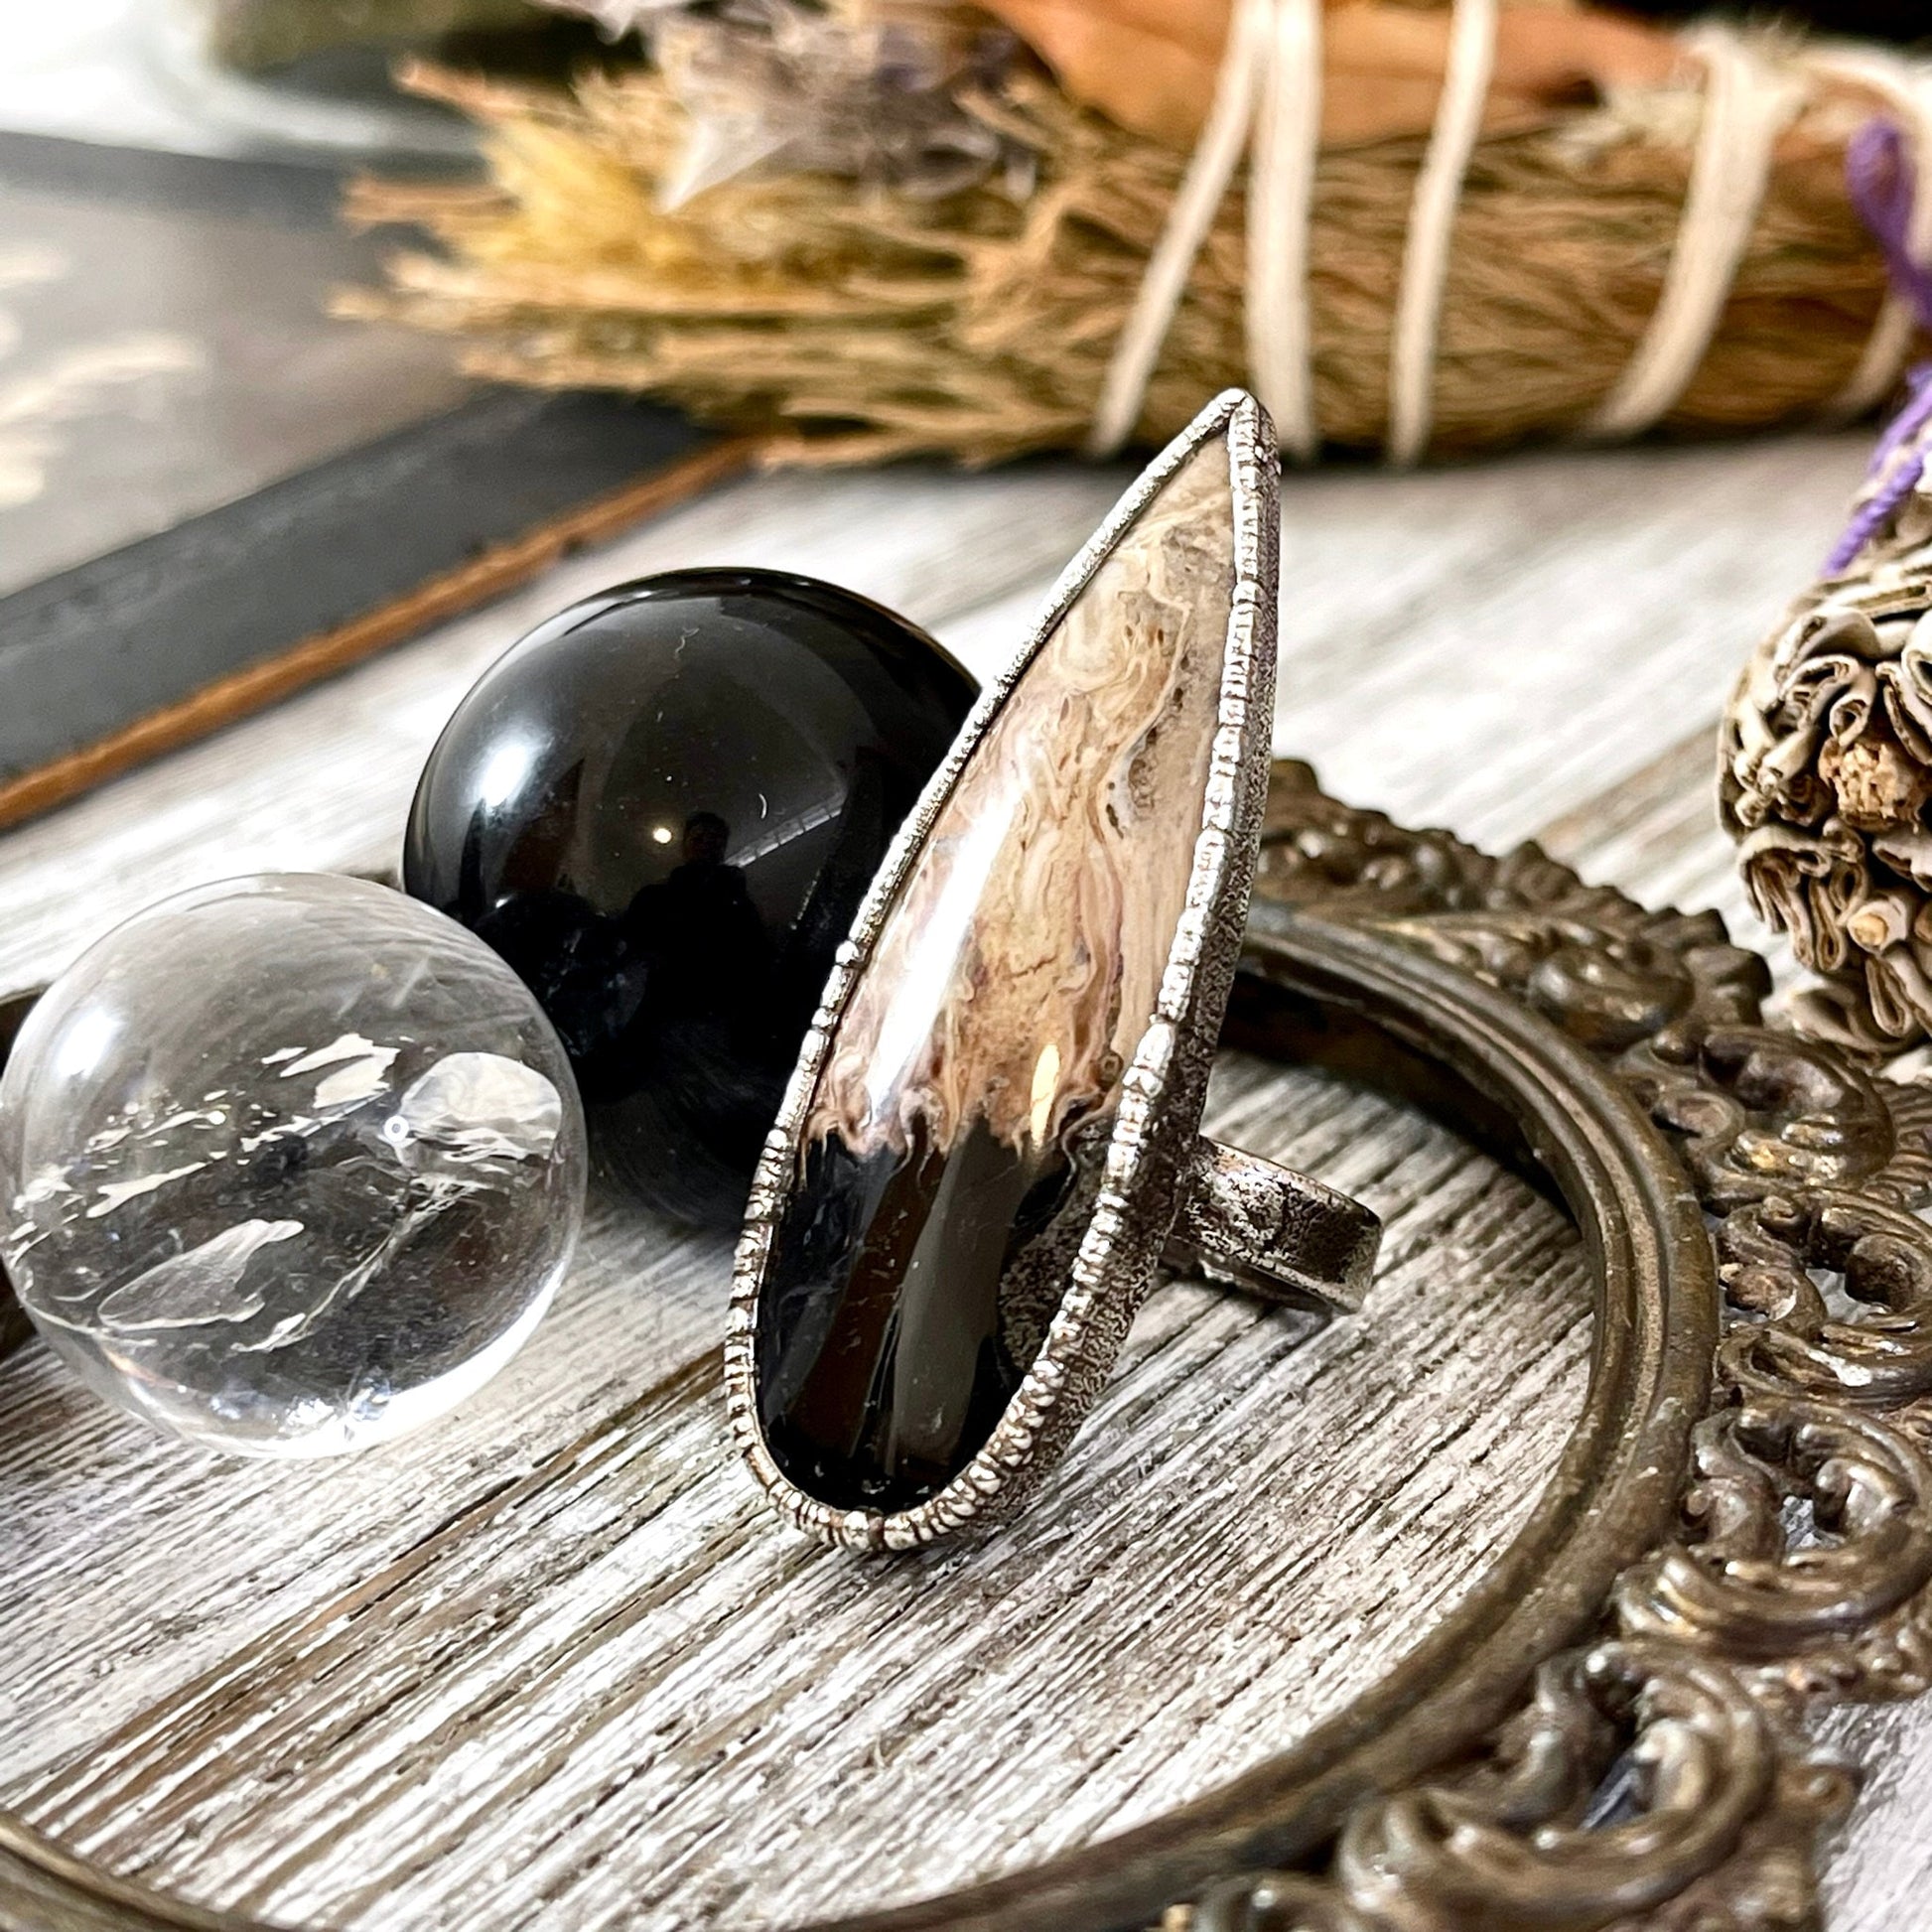 Big Bold Jewelry, Big Crystal Ring, Big Silver Ring, Big Stone Ring, Etsy ID: 1400312890, Fossilized Palm Root, FOXLARK- RINGS, Jewelry, Large Boho Ring, Large Crystal Ring, Large Stone Ring, Natural stone ring, Rings, silver crystal ring, Silver Stone Je